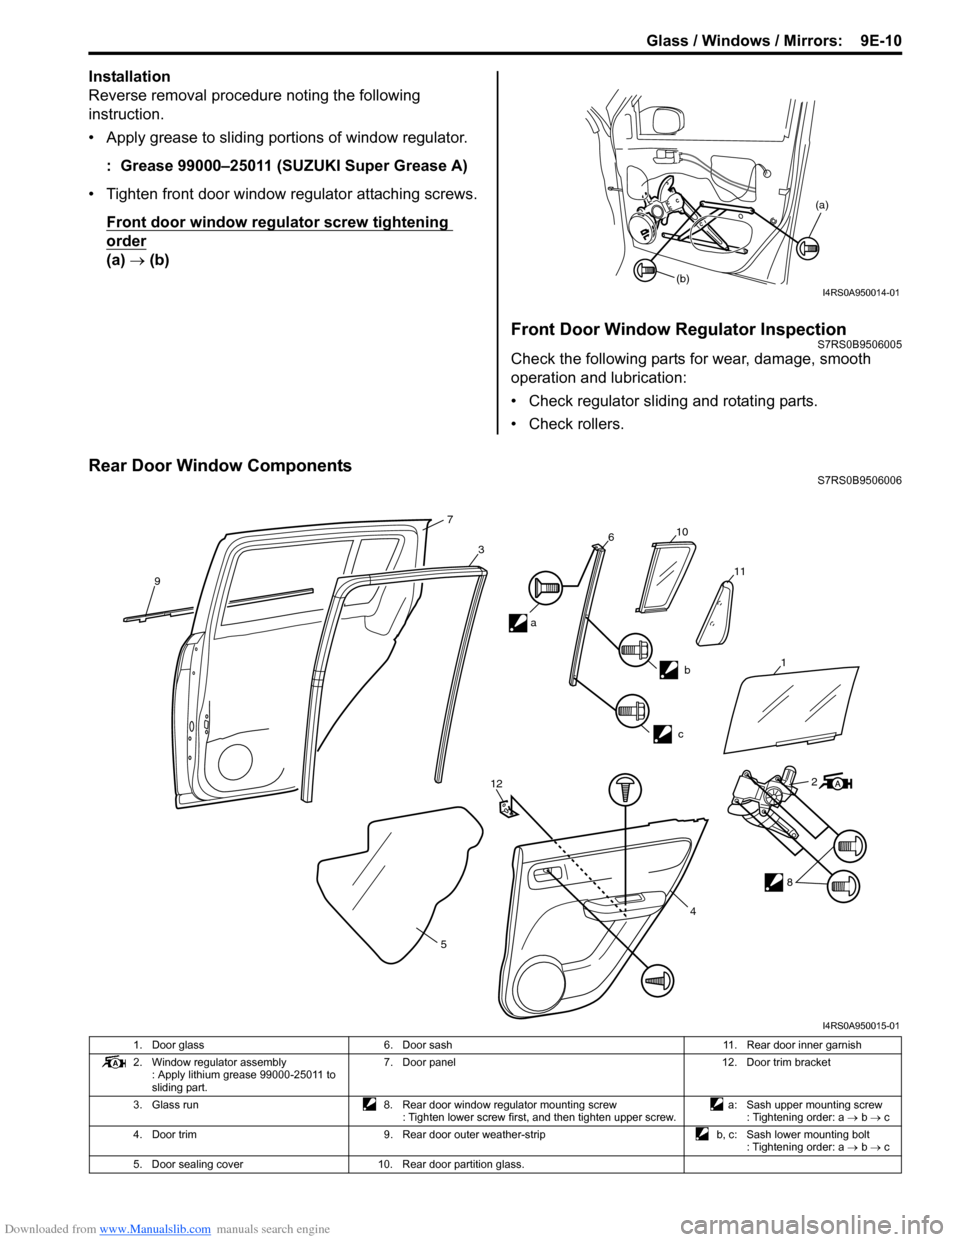 SUZUKI SWIFT 2008 2.G Service Owners Manual Downloaded from www.Manualslib.com manuals search engine Glass / Windows / Mirrors:  9E-10
Installation
Reverse removal procedure noting the following 
instruction.
• Apply grease to sliding portion